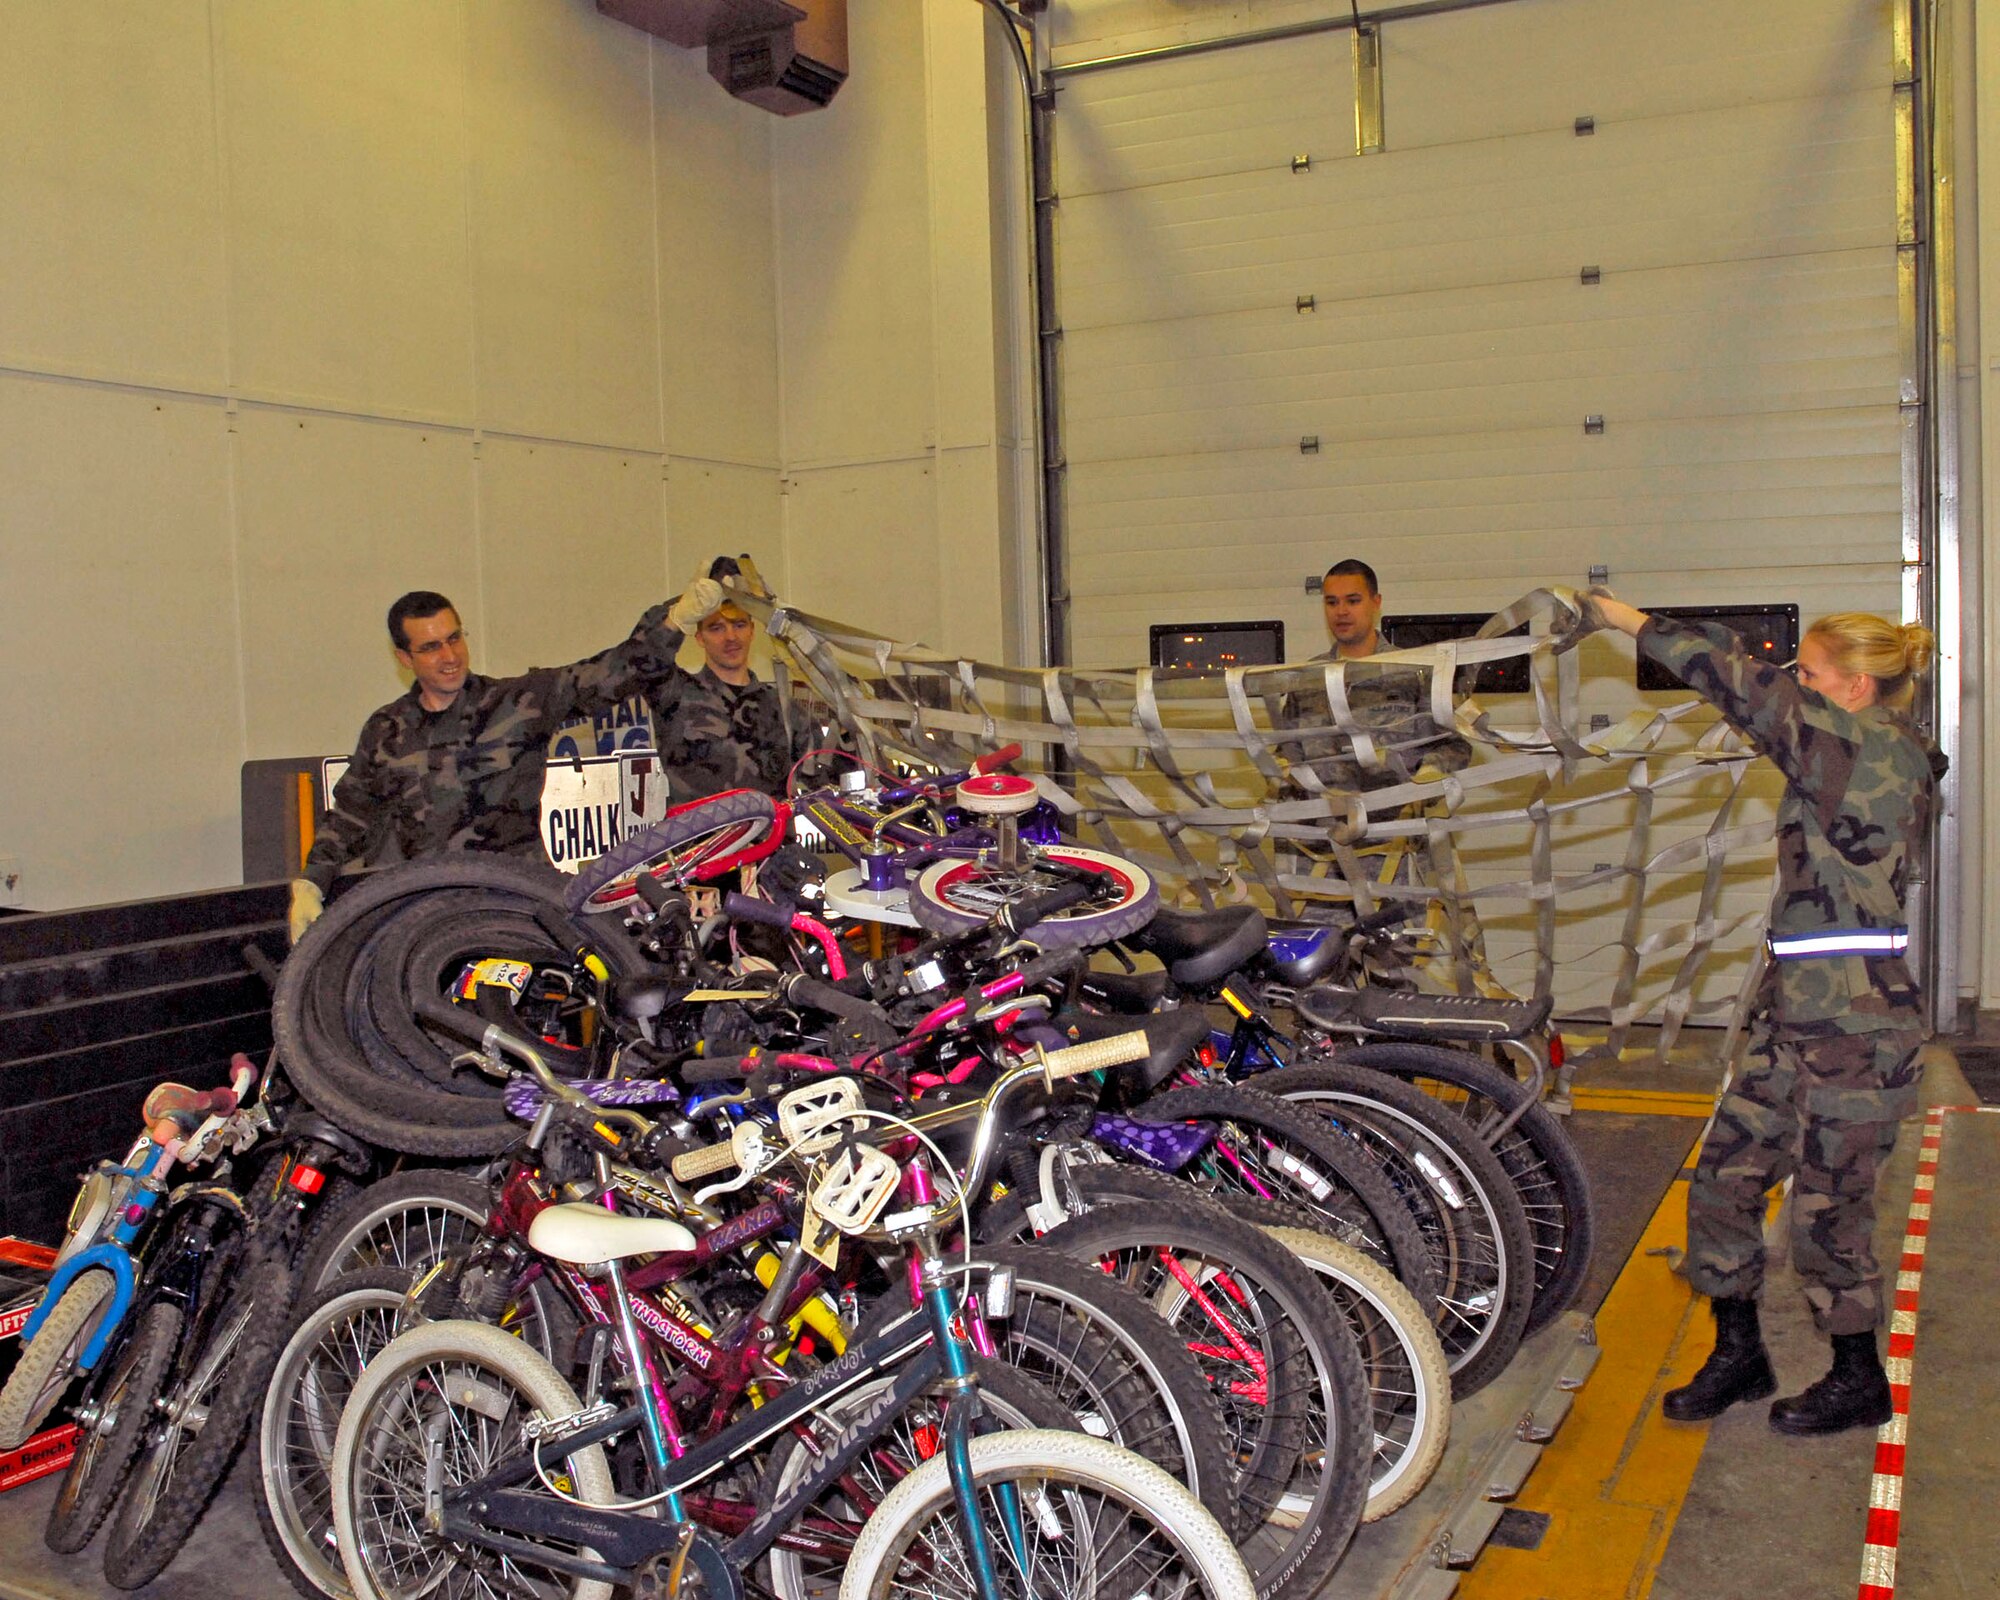 (Left to right) Alaska Air Guardsmen Staff Sgt. Woody Miller, Senior Airman John Darnall, Senior Airman Ryan Pierce and Tech. Sgt. Summer Rehak from the 176th Logistics Readiness Squadron pulls a top net over a pallet of refurbished bicycles on December 6, 2009. The bikes will be airlifted to Afghanistan to be given to disadvantaged children. (Alaska Air National Guard photo/Tech. Sgt. Shannon Oleson)